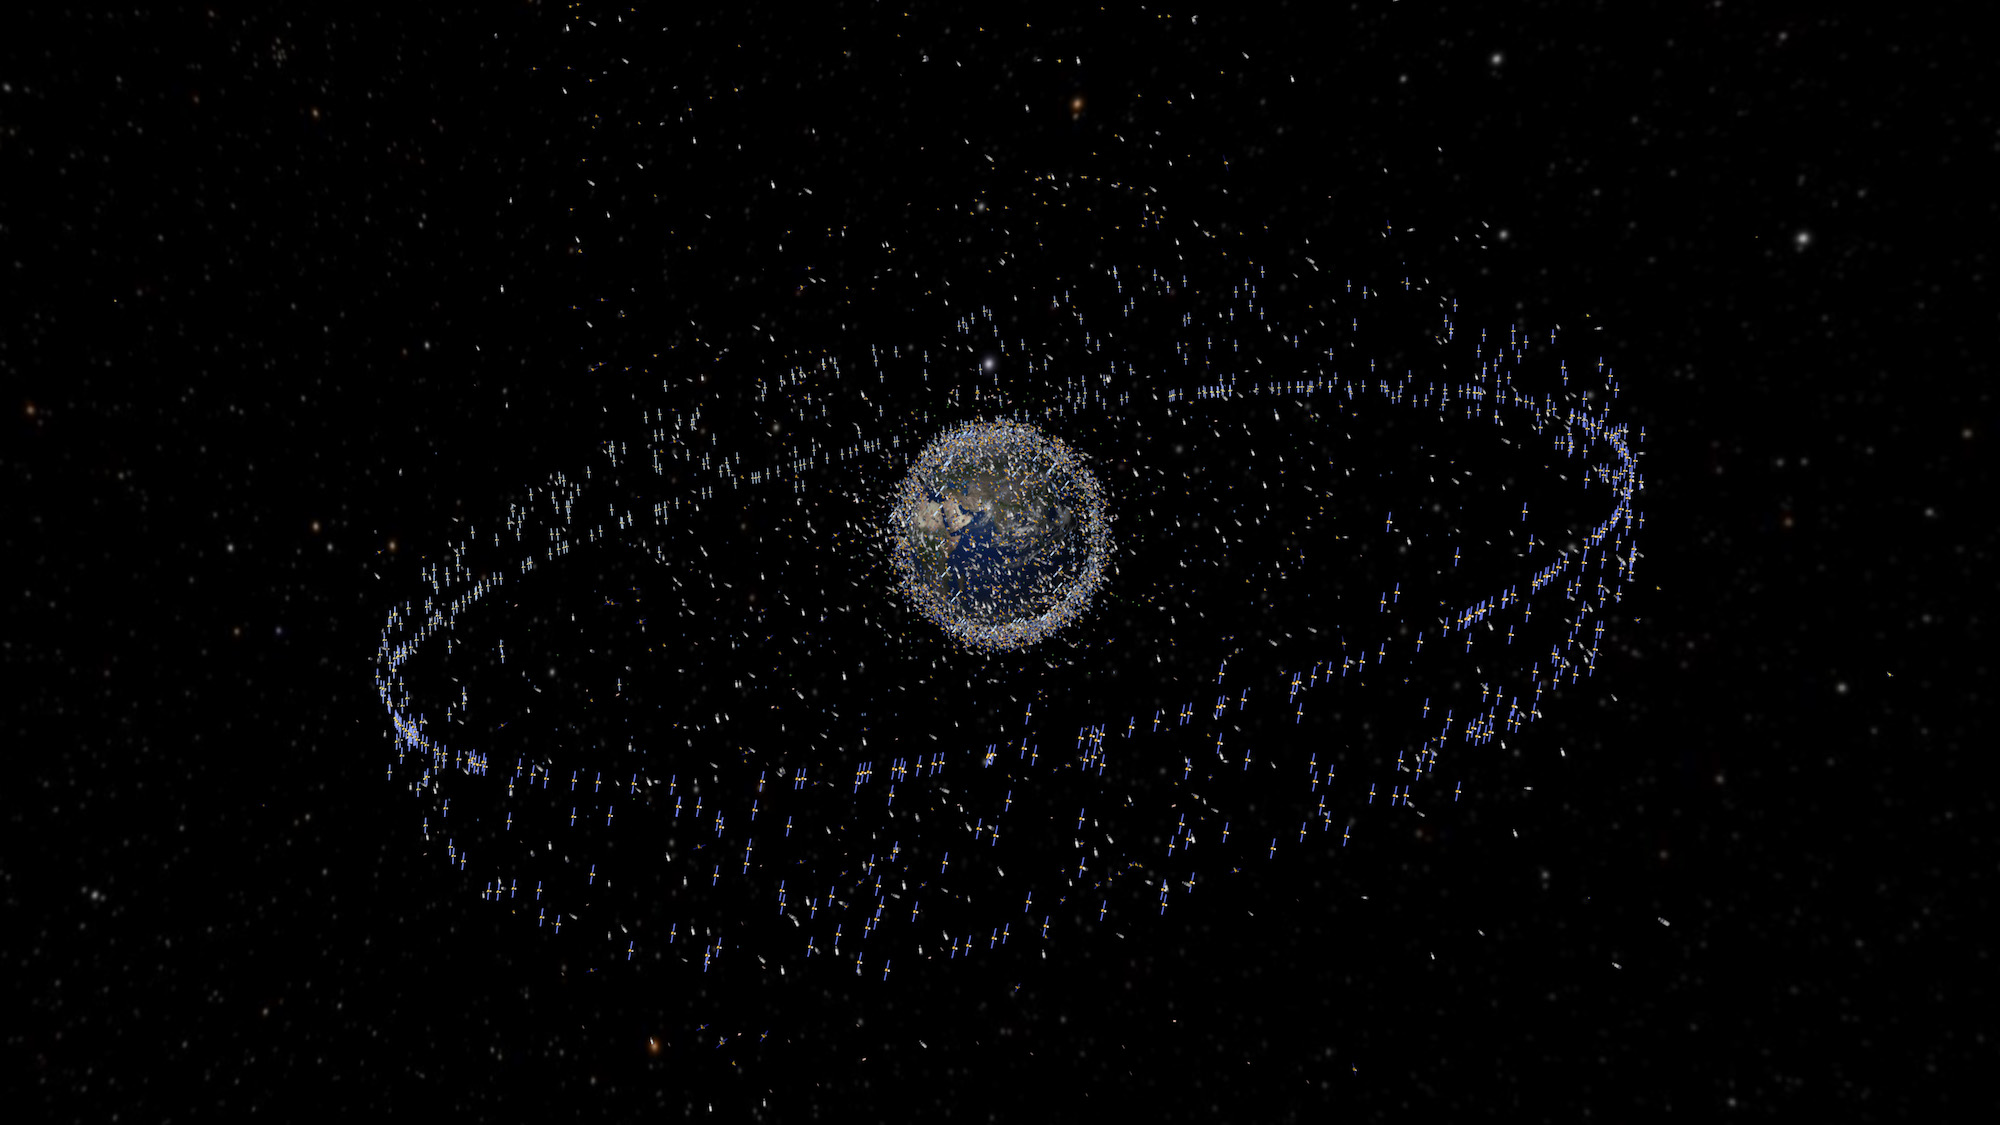 Some space junk just got smacked by more space junk, complicating cleanup